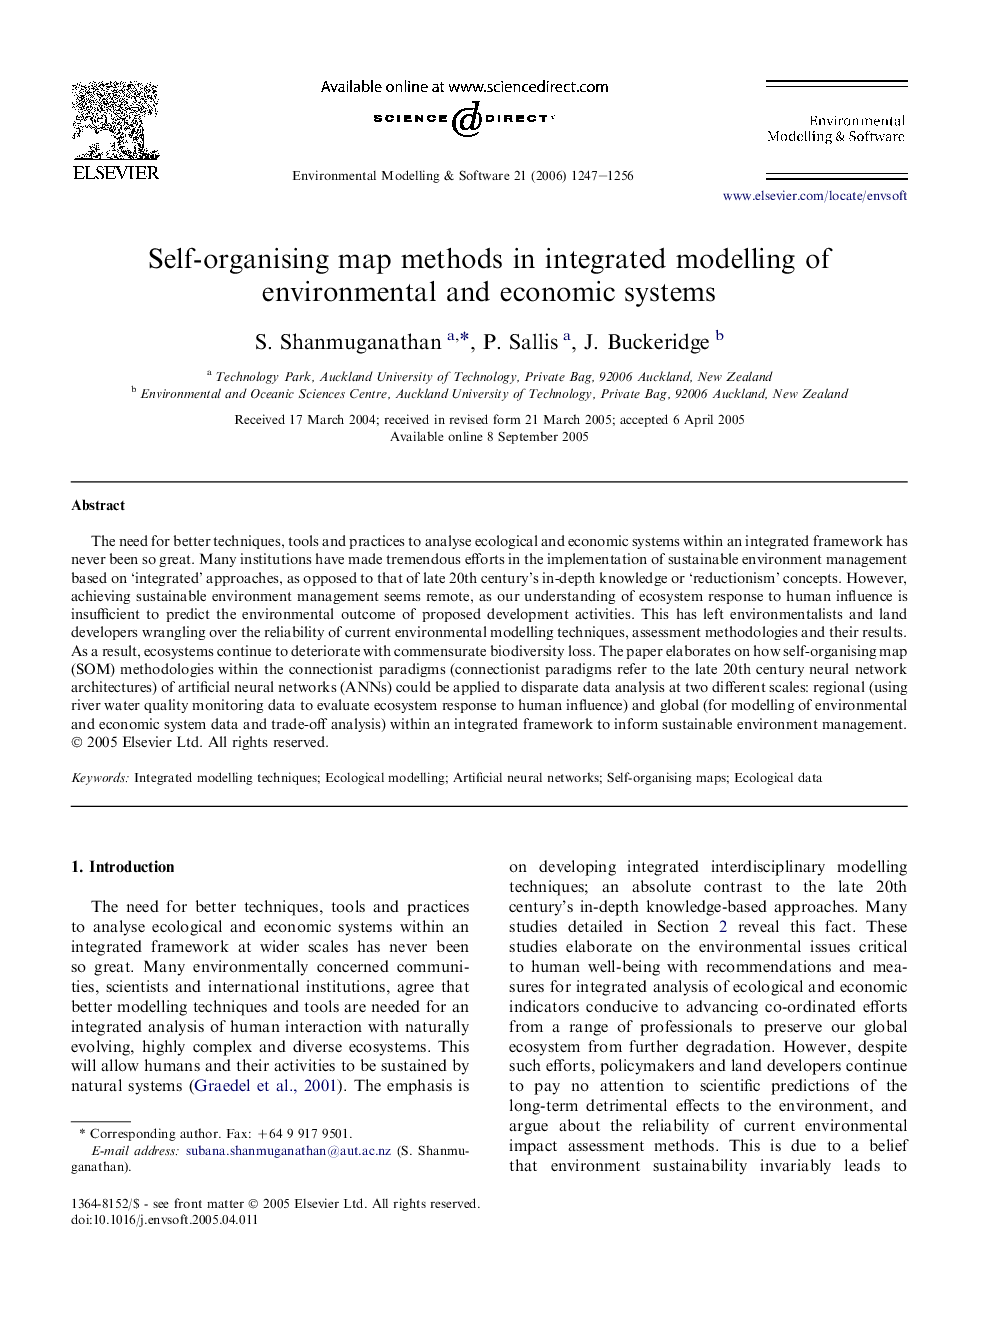 Self-organising map methods in integrated modelling of environmental and economic systems